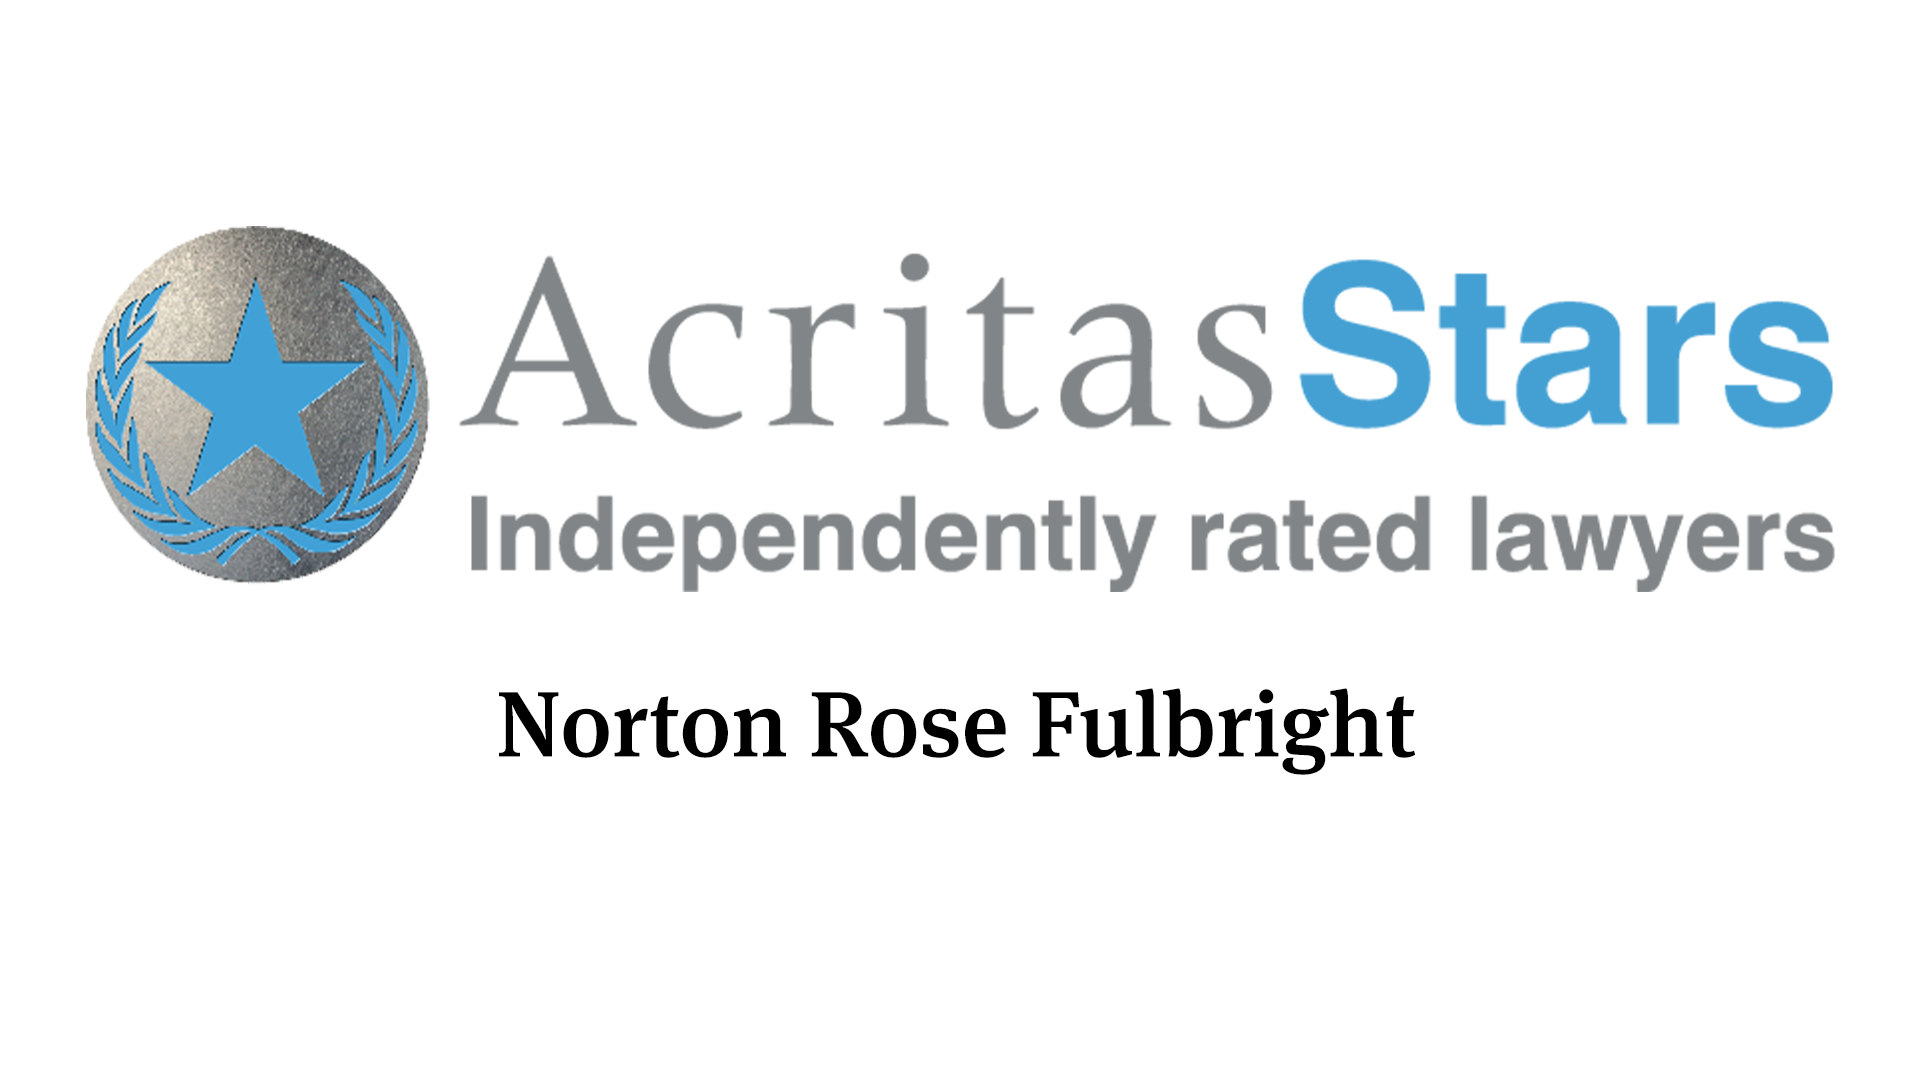 2021 Acritas Stars features 177 Norton Rose Fulbright lawyers